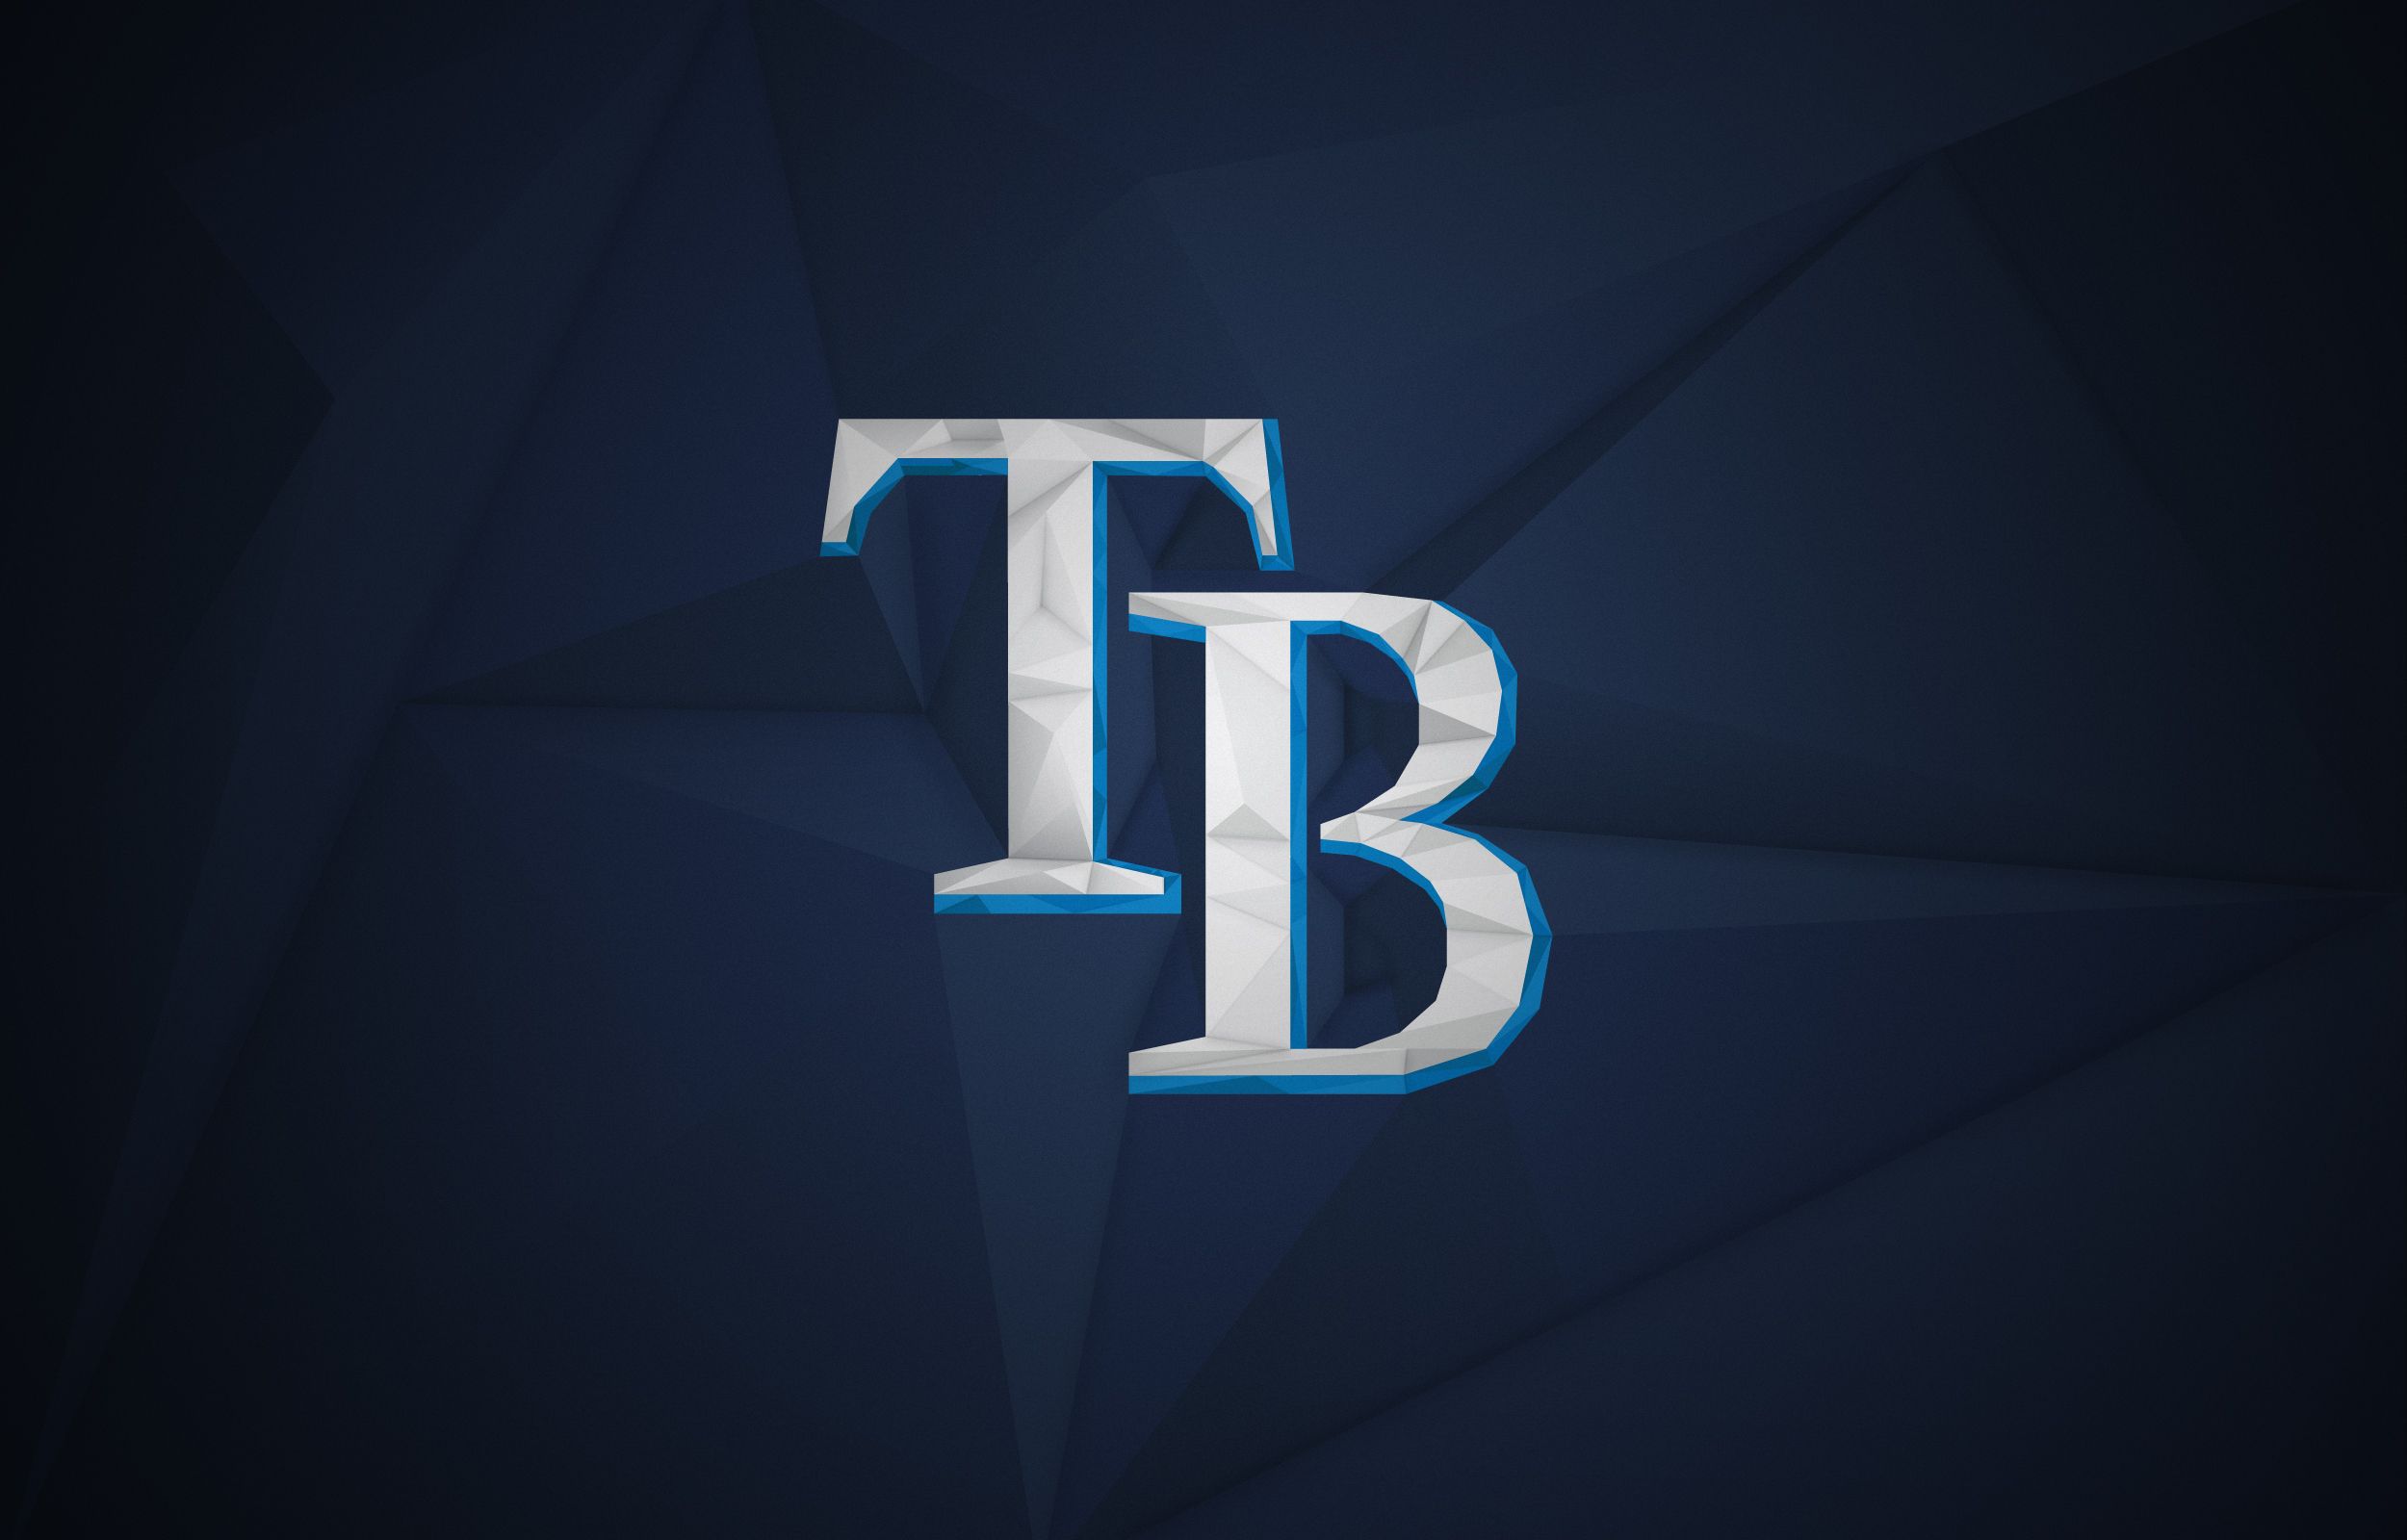 Tampa Bay Rays Wallpaper Image Photos Pictures